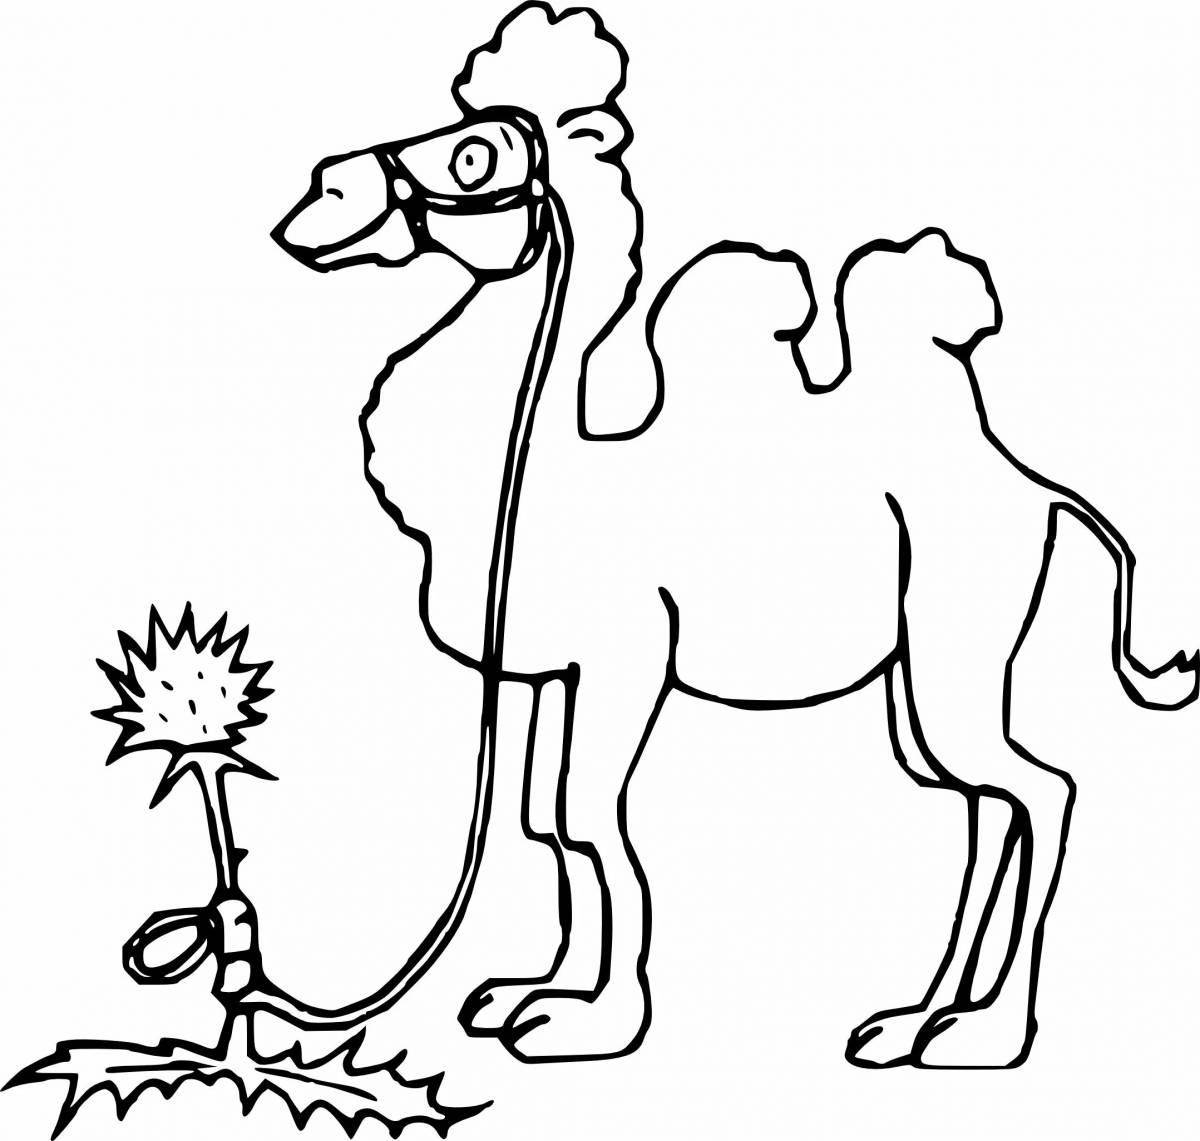 Coloring book shiny camel